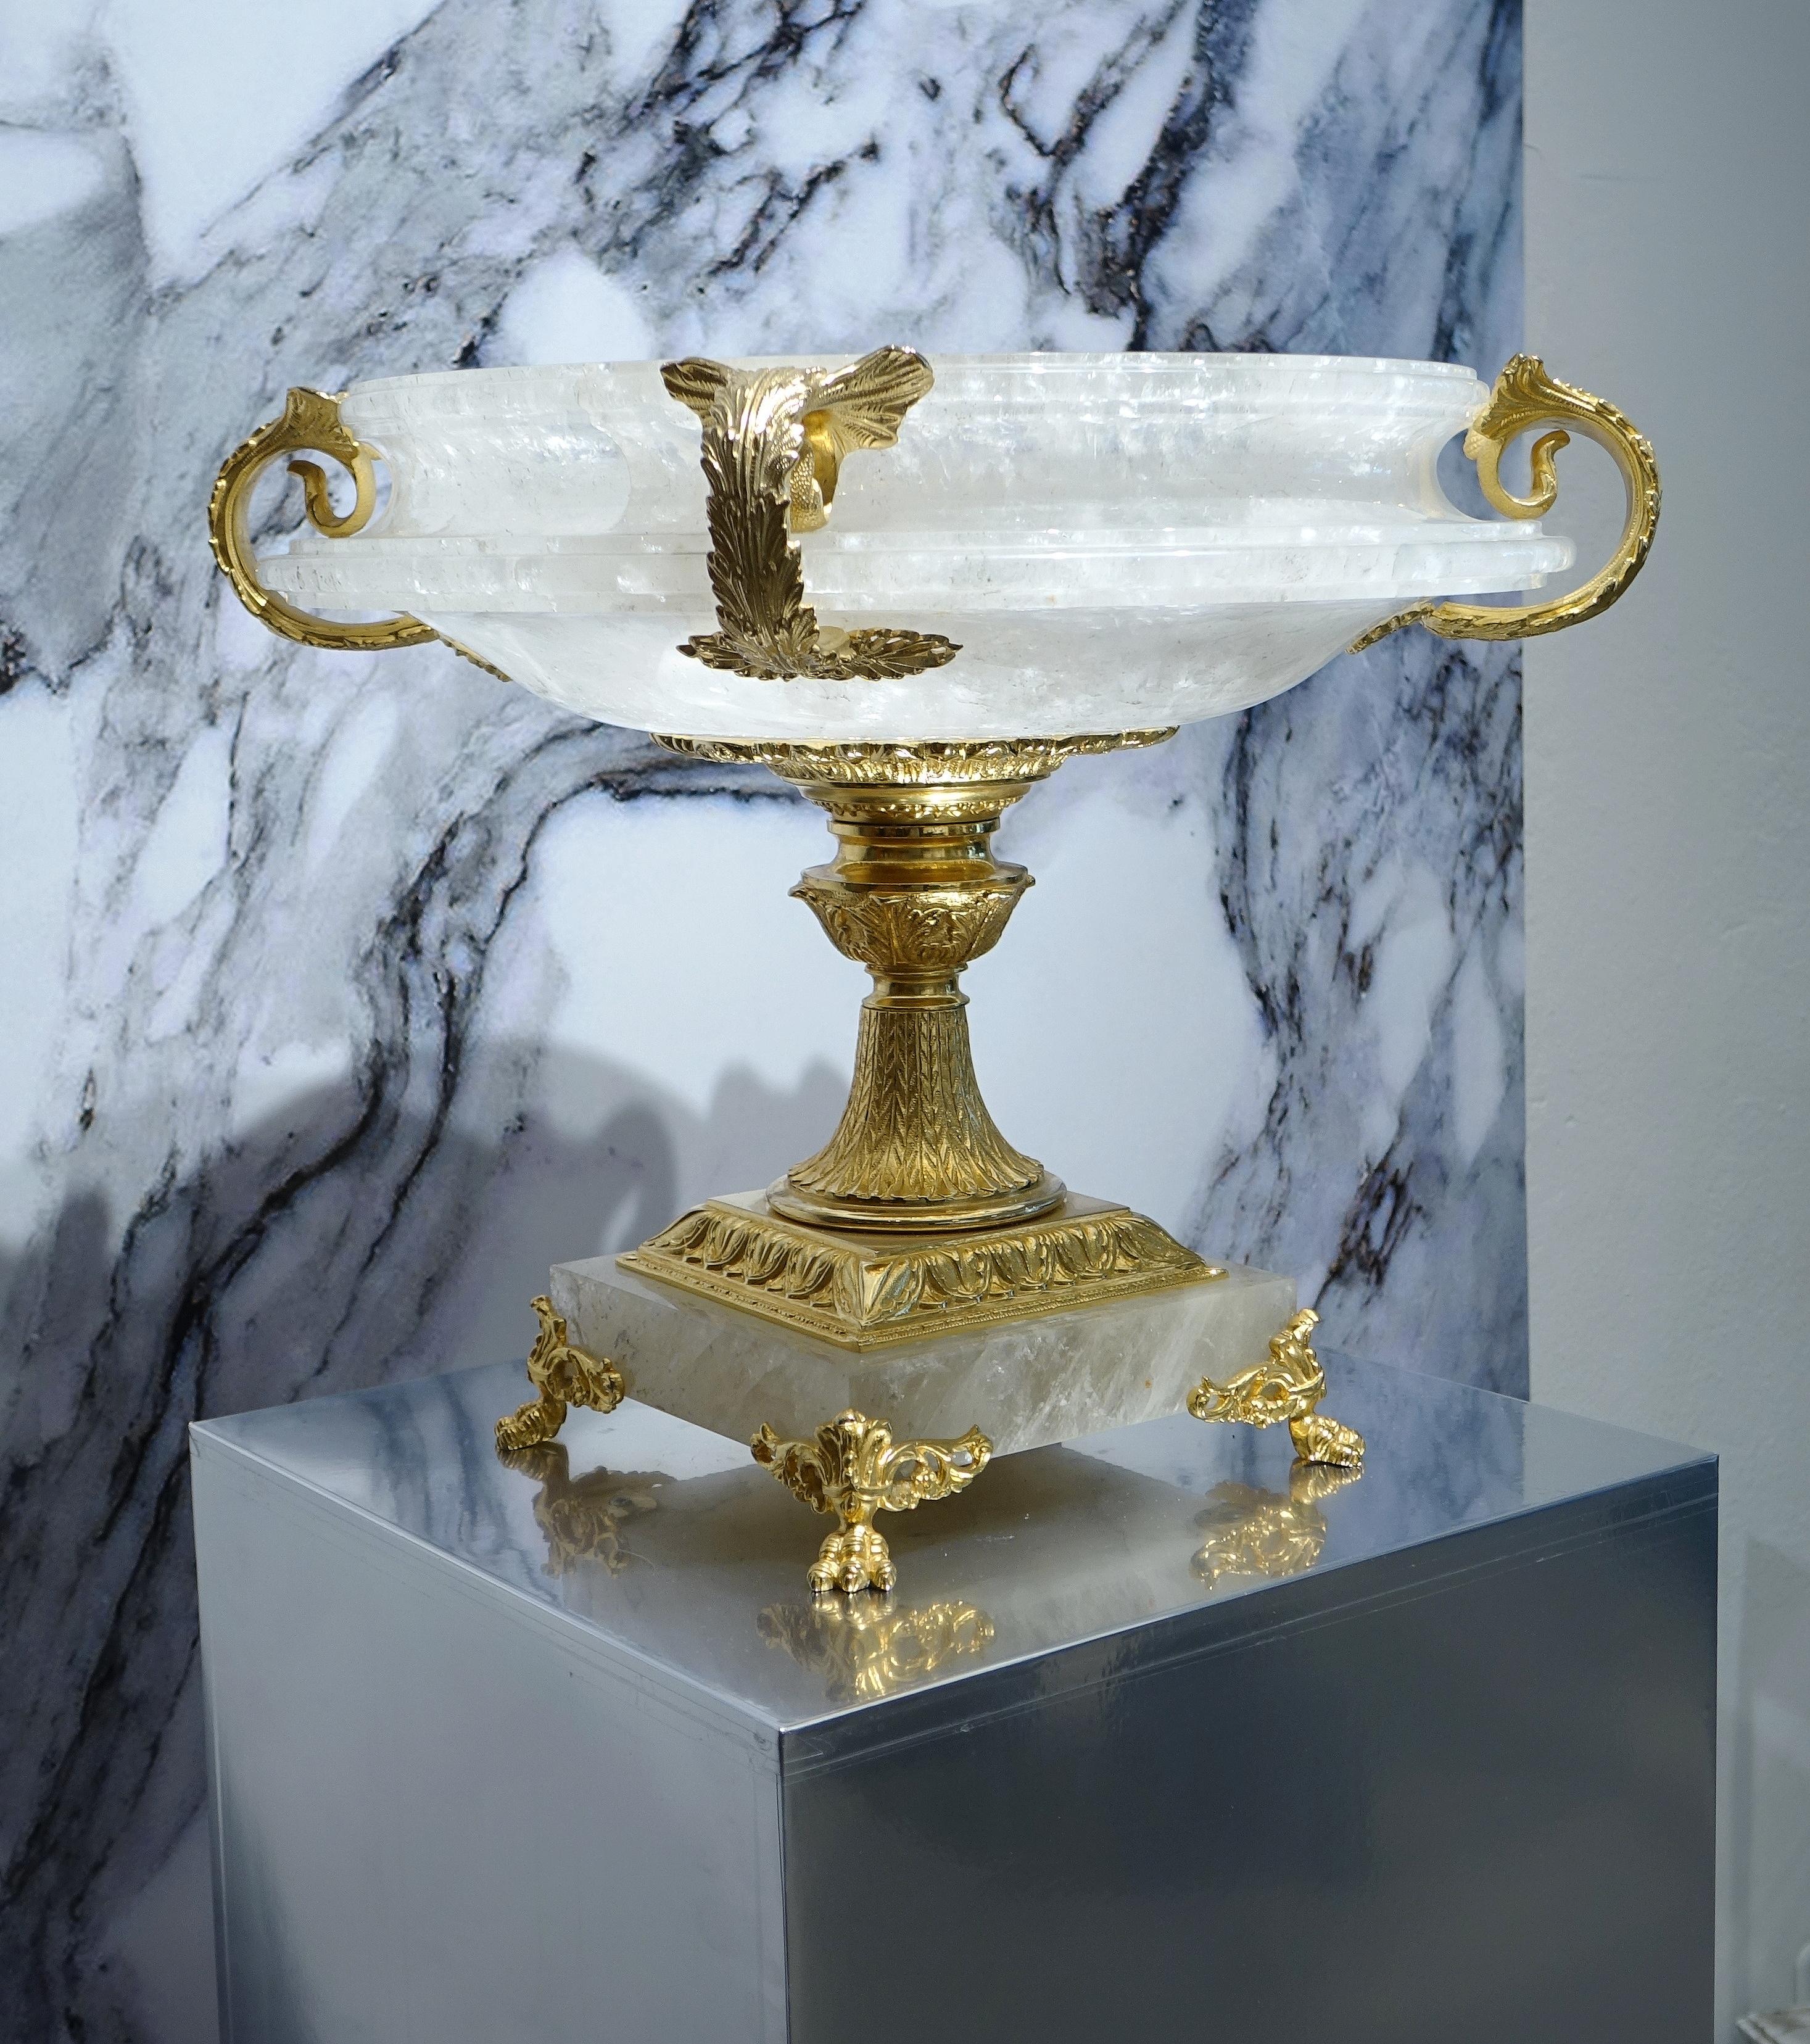 Gilt bronze vase and rock crystal.
Made by the Tosco-Ticciati company from Ferenza.

Unique piece in perfect condition.
Measurements: 45 x 45 height 34cm.

Tosco Ticciati, a long tradition of wisdom and artisanal heritage.

Born in the early